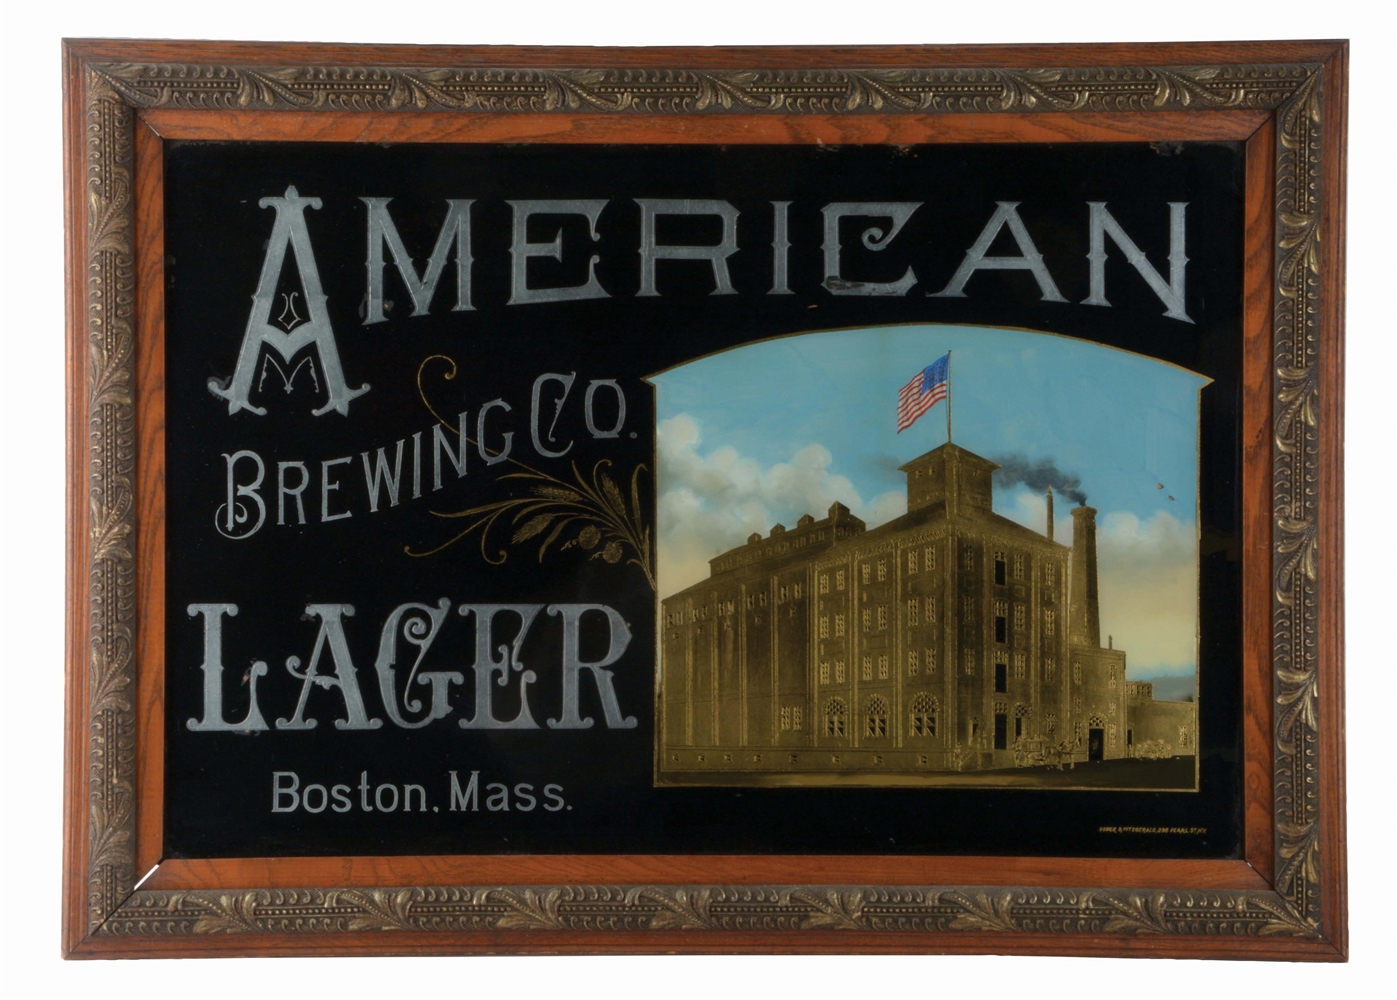 AMERICAN BREWING COMPANY LAGER REVERSE GLASS ADVERTISING SIGN.